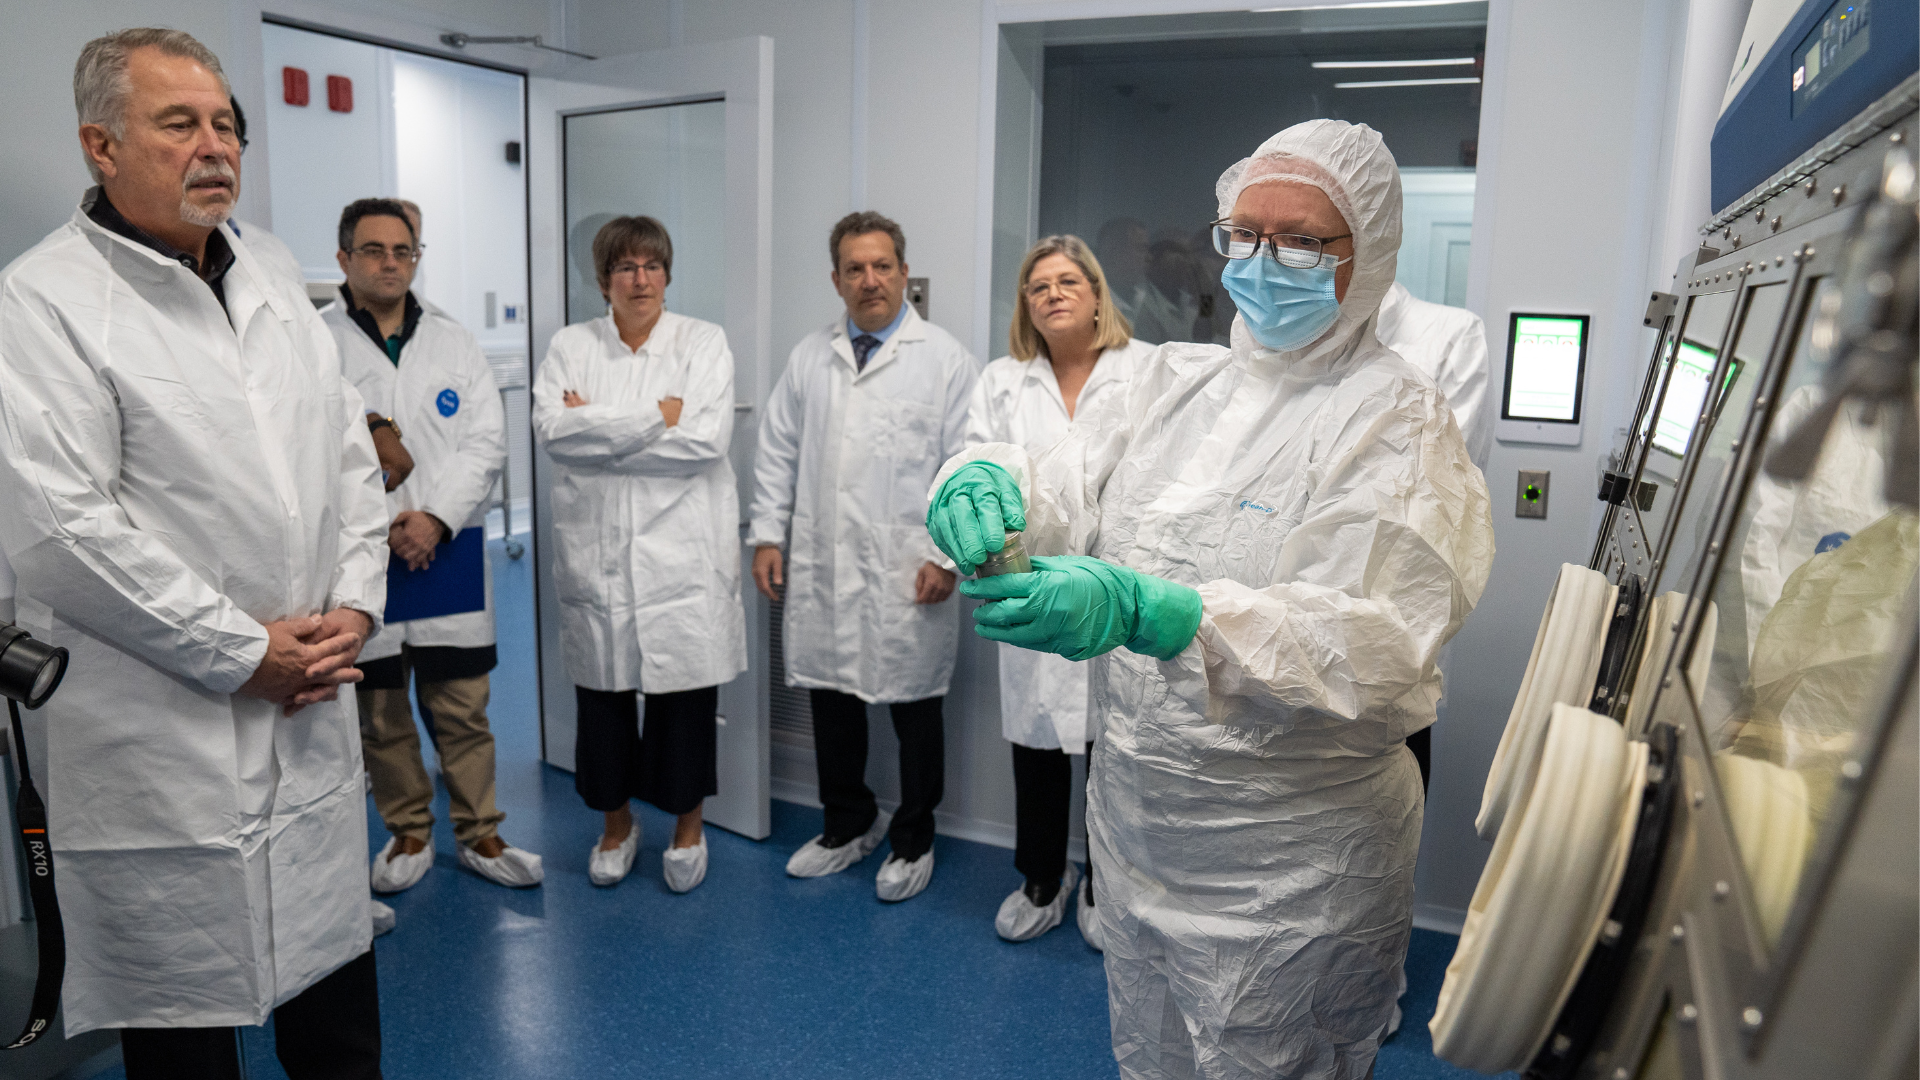  Five people wearing lab coats look on as someone in full personal protective equipment makes a demonstration in front of laboratory equipment 